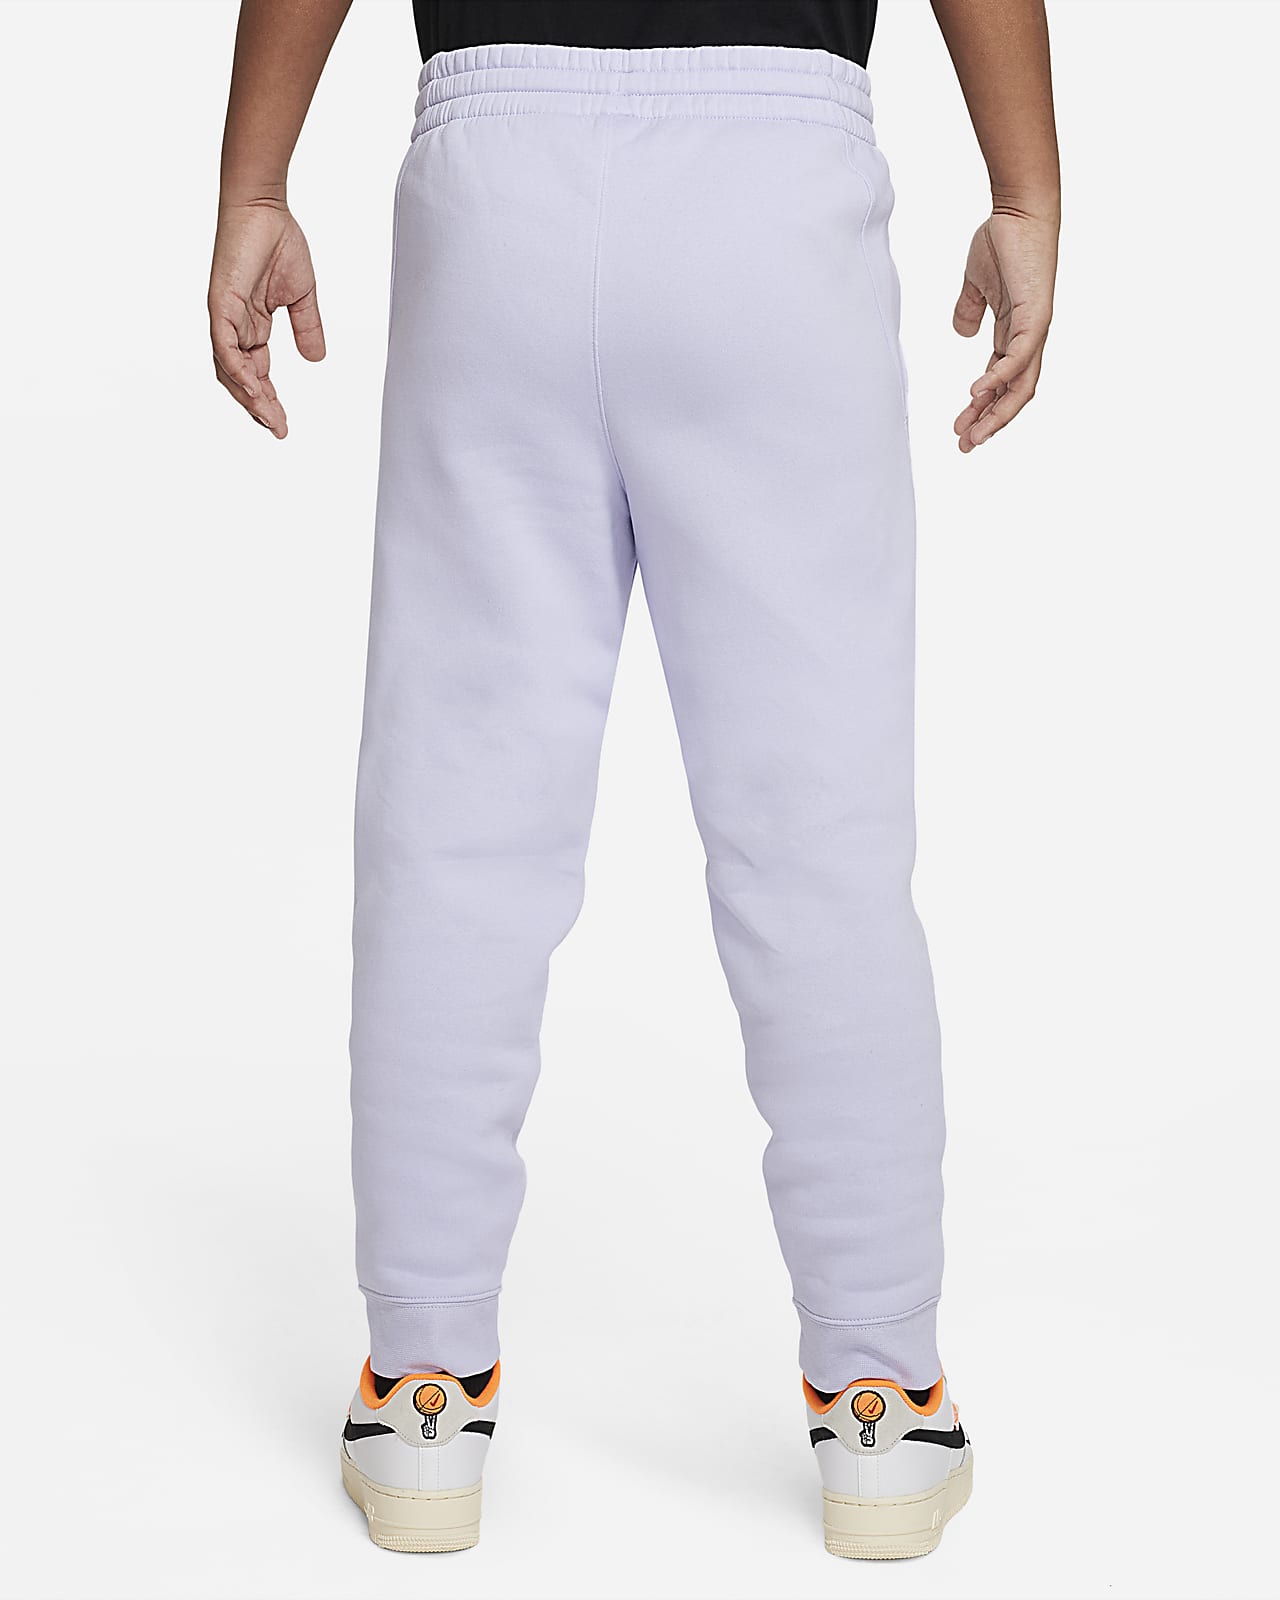 Nike Youth Cotton Jogger